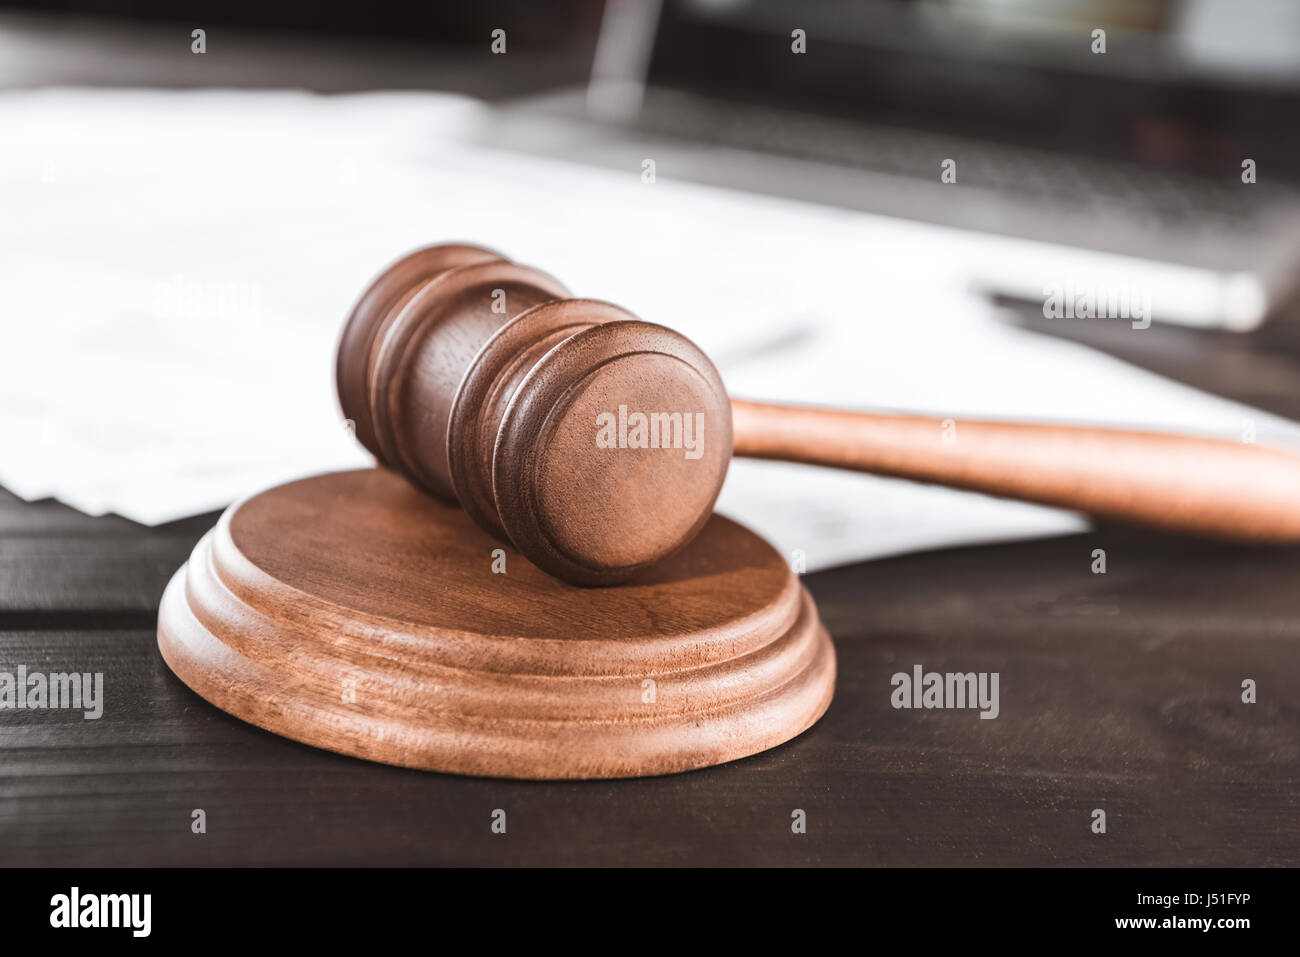 law concept. different objects of lawyer Stock Photo